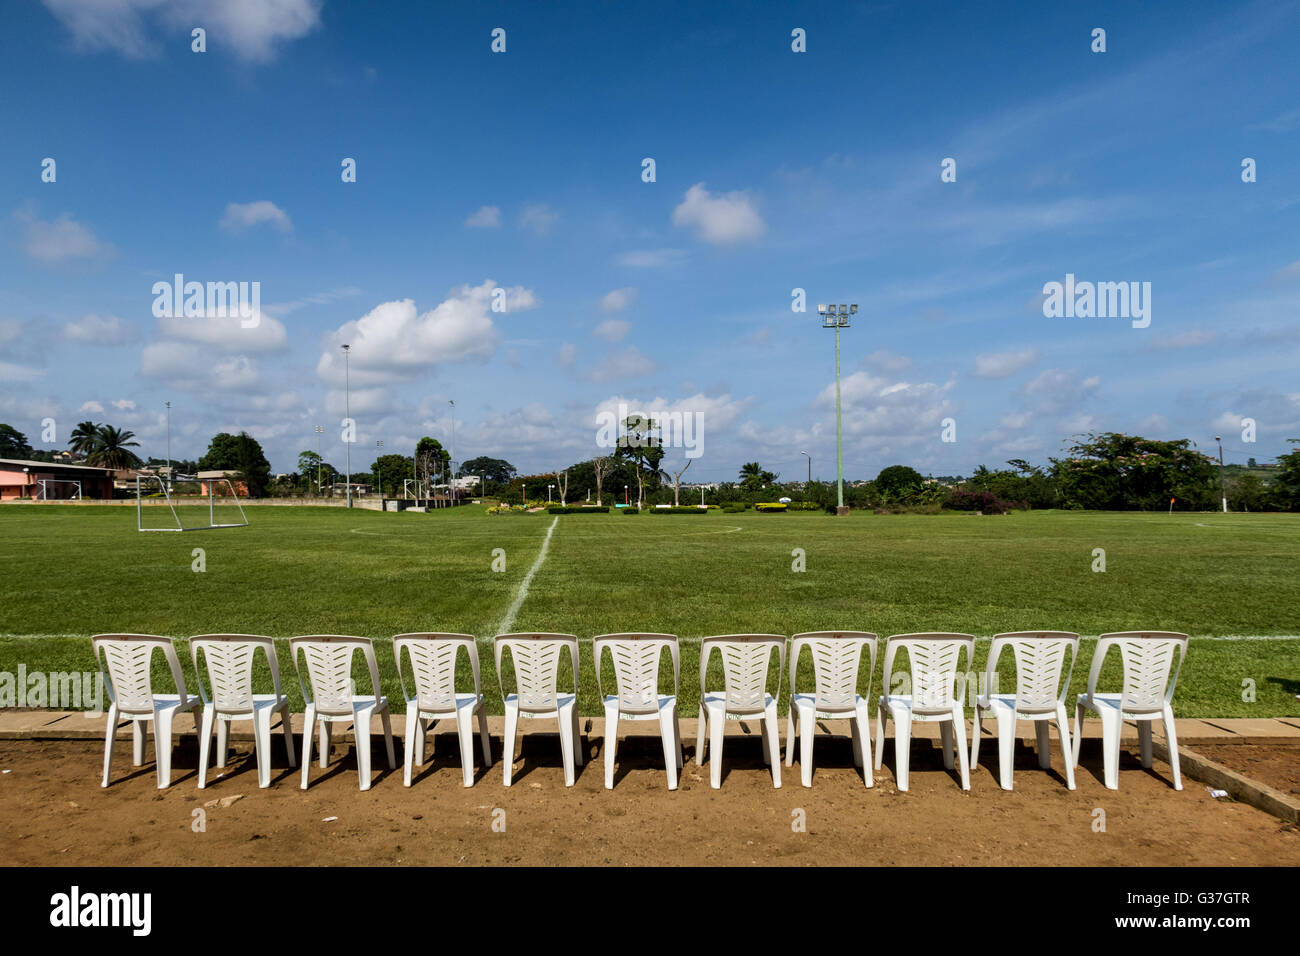 Row of spectator chairs lined up next to a practice football ground in Abidjan, Cote d'Ivoire. Stock Photo